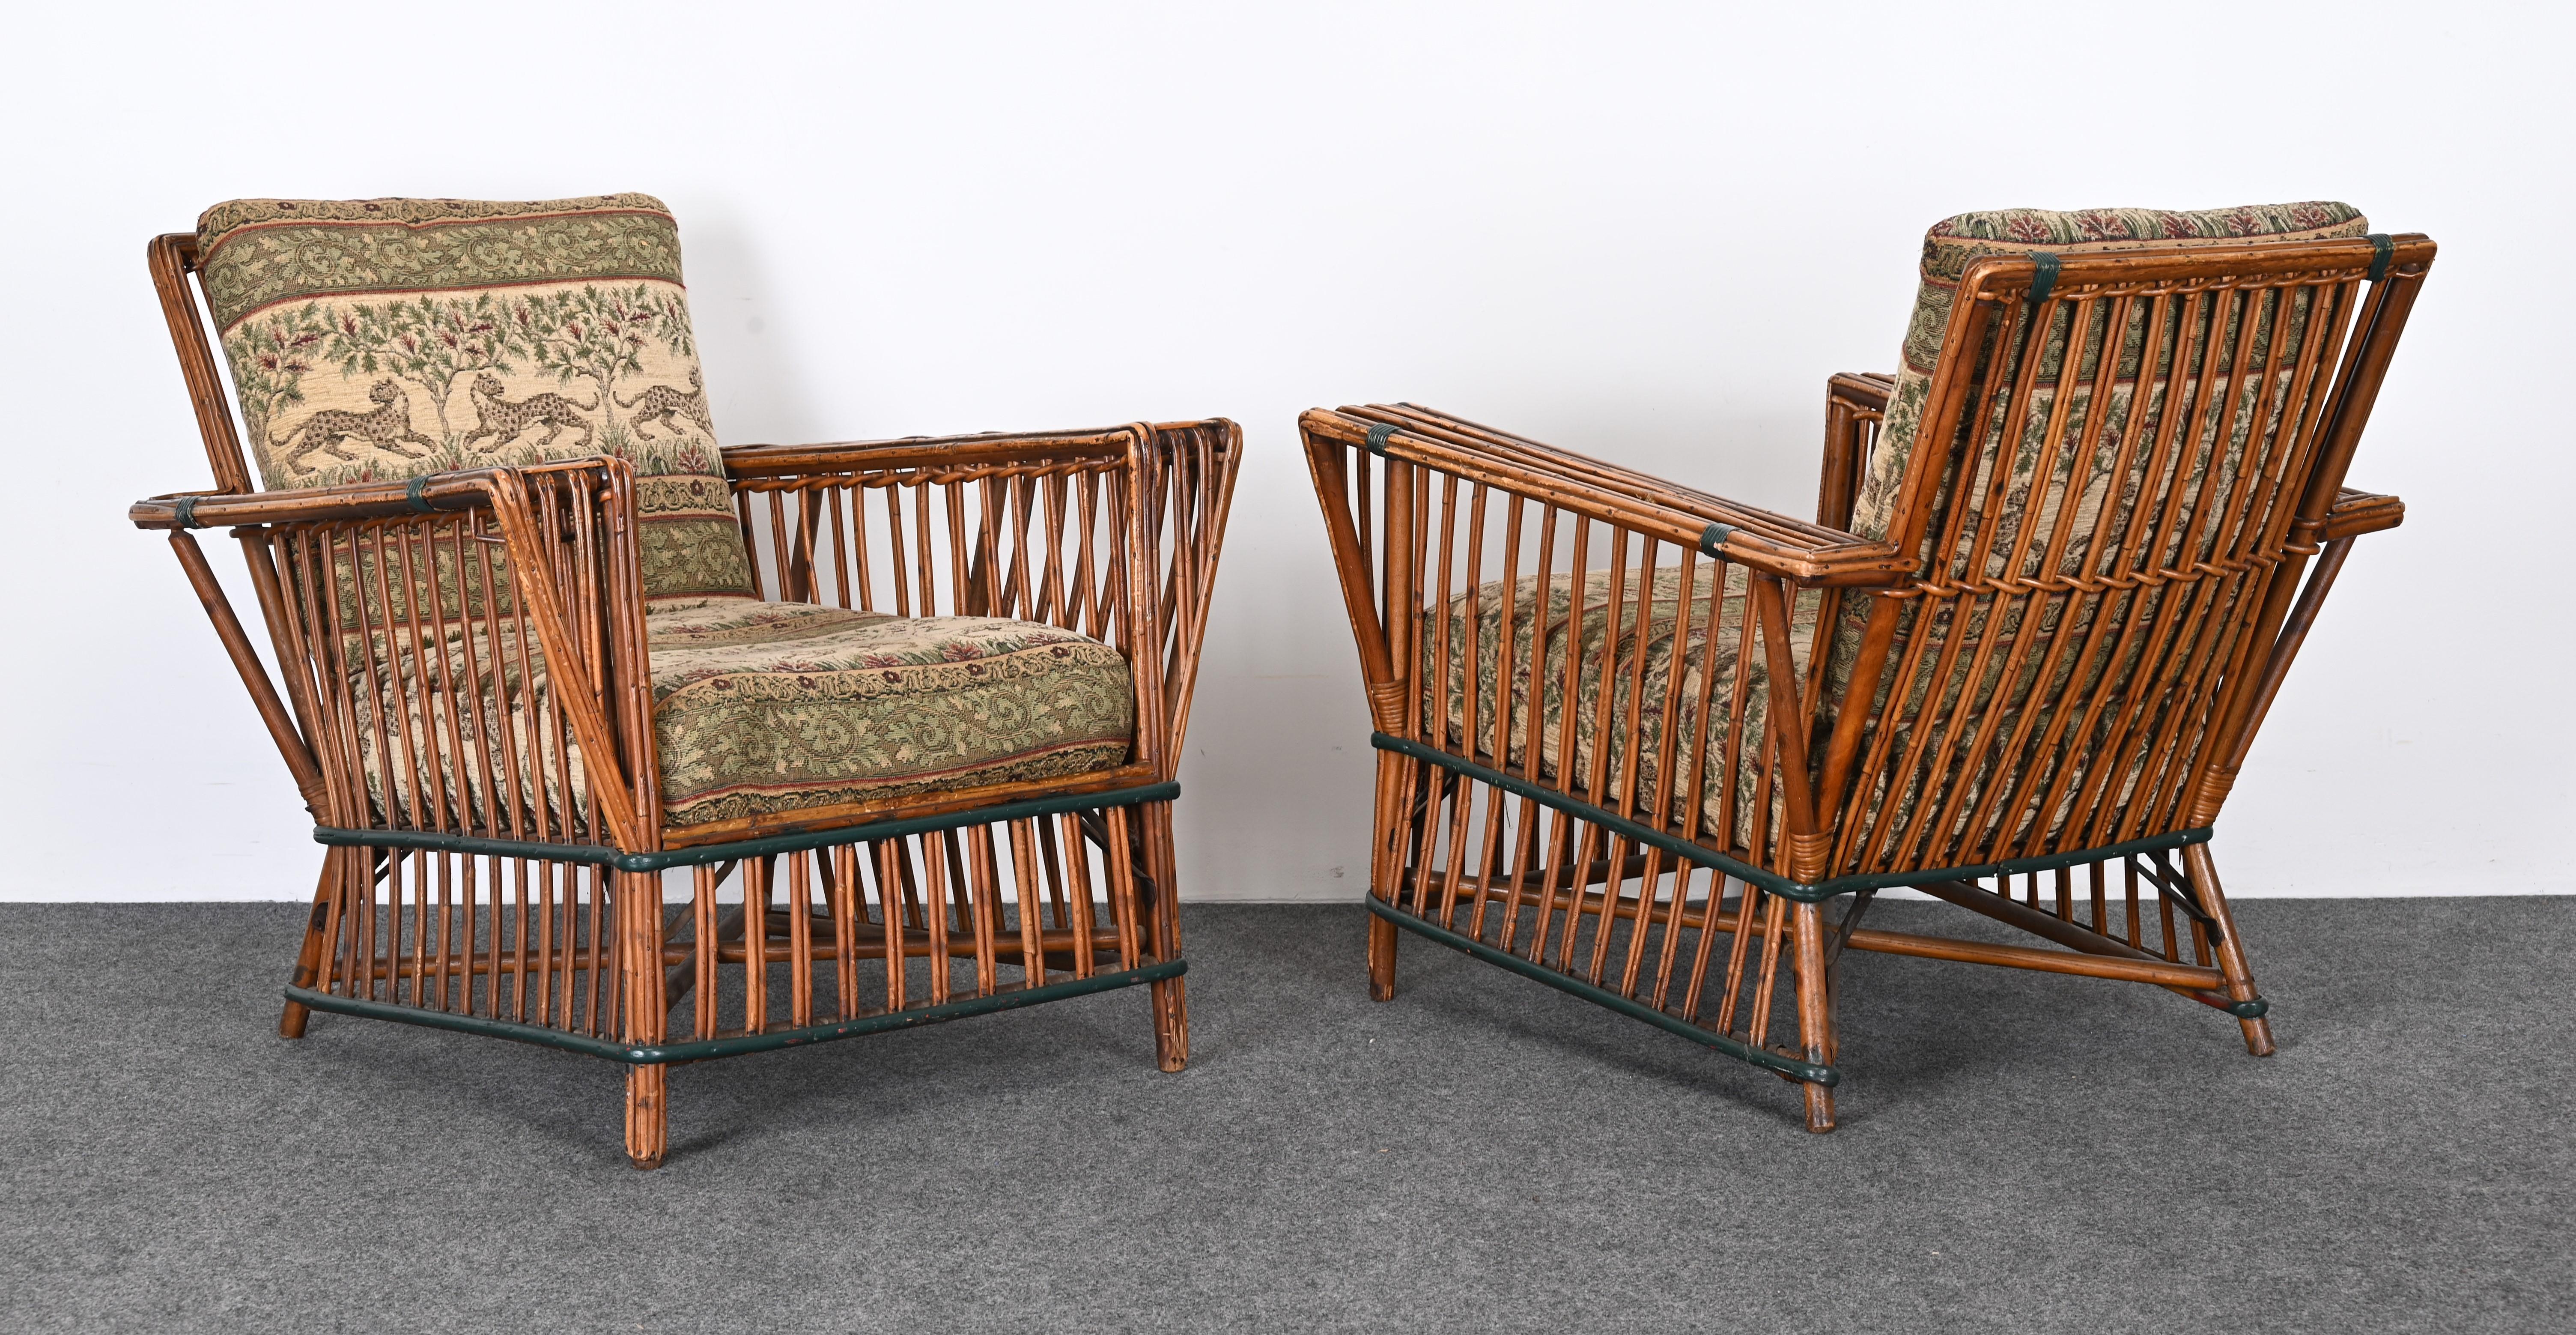 Mid-20th Century Art Deco Split Ypsilanti Stick Reed Wicker or Sofa with Pair Arm Chairs c. 1930s For Sale